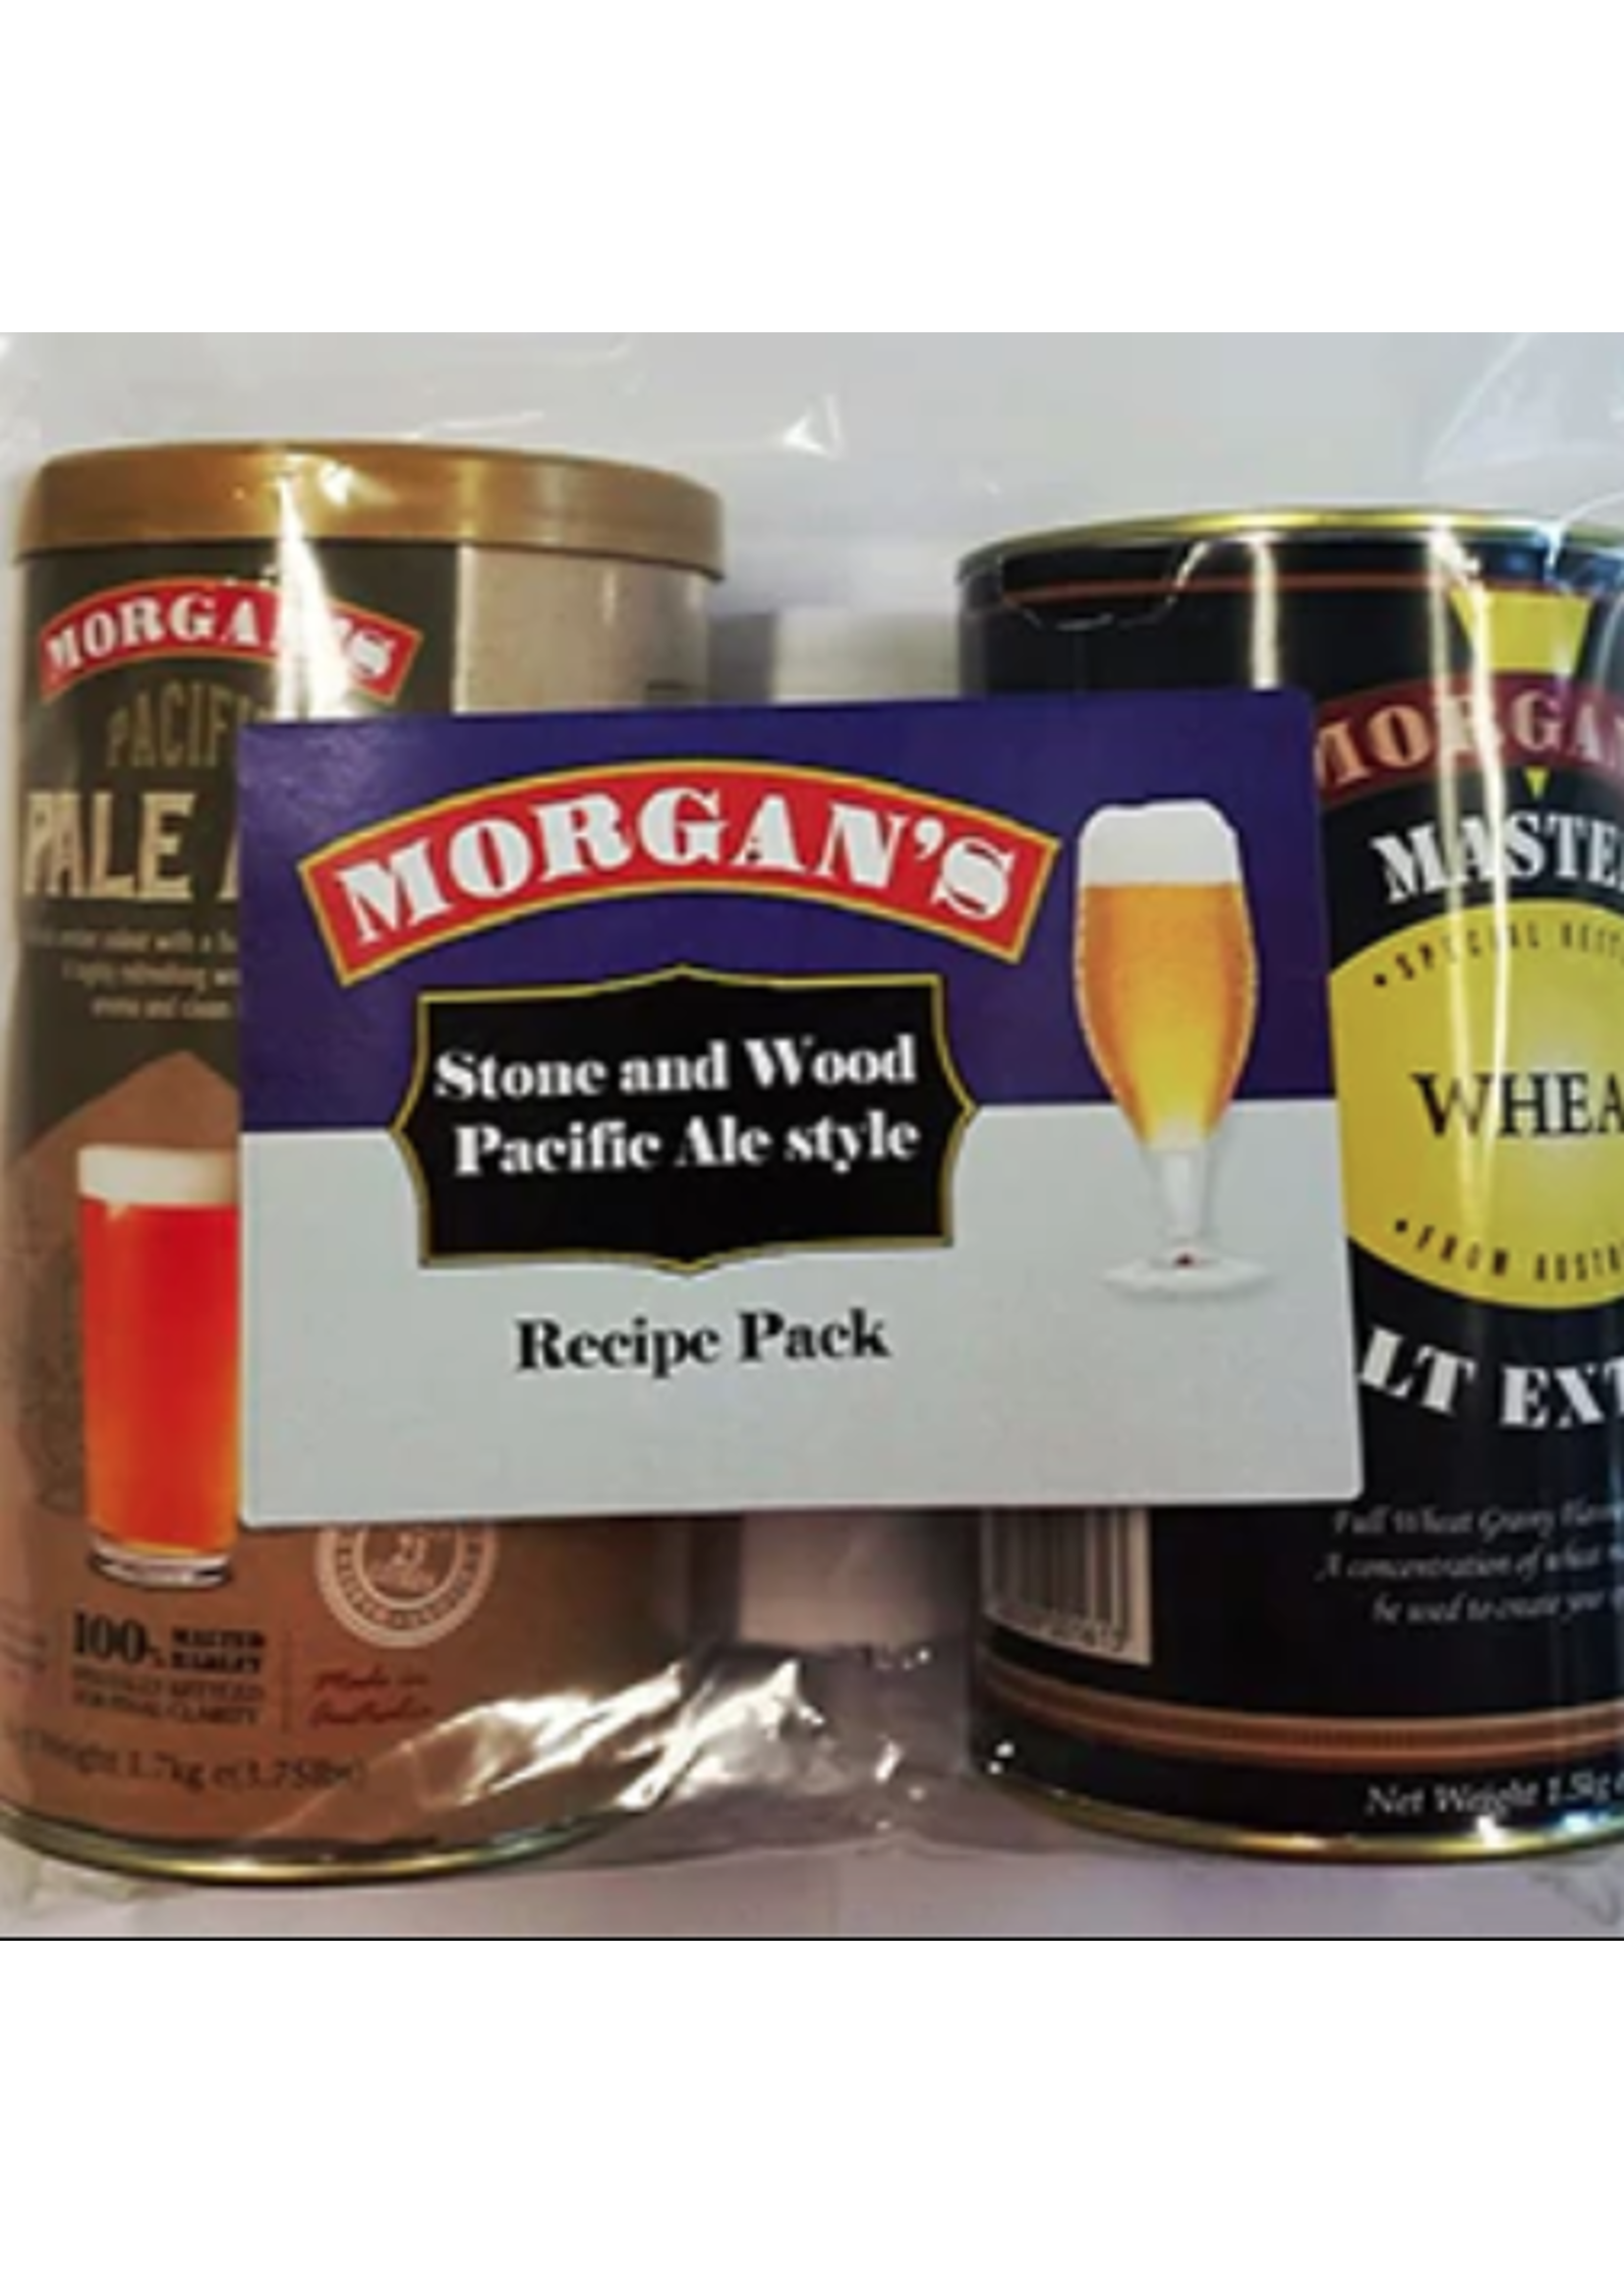 Morgan's Morgans  Recipe Pack Stone and Wood Style Pacific Ale style  - kit 2 tins plus hops